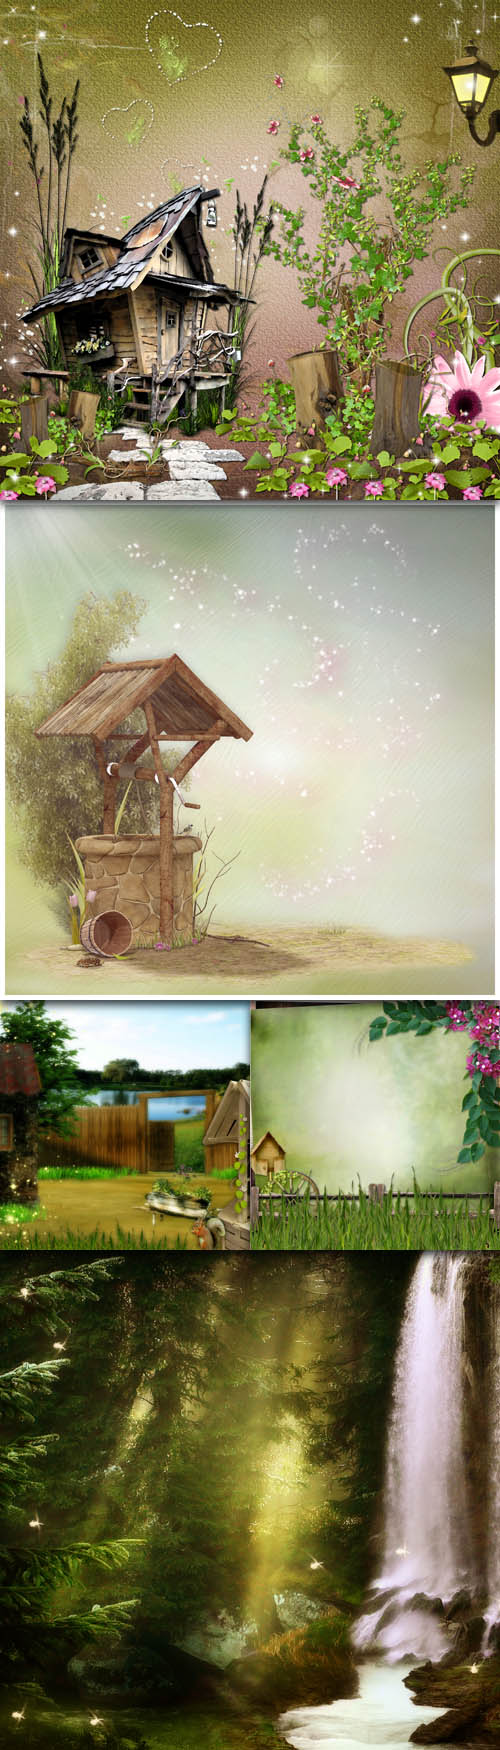 Backgrounds - 5 Magical Papers